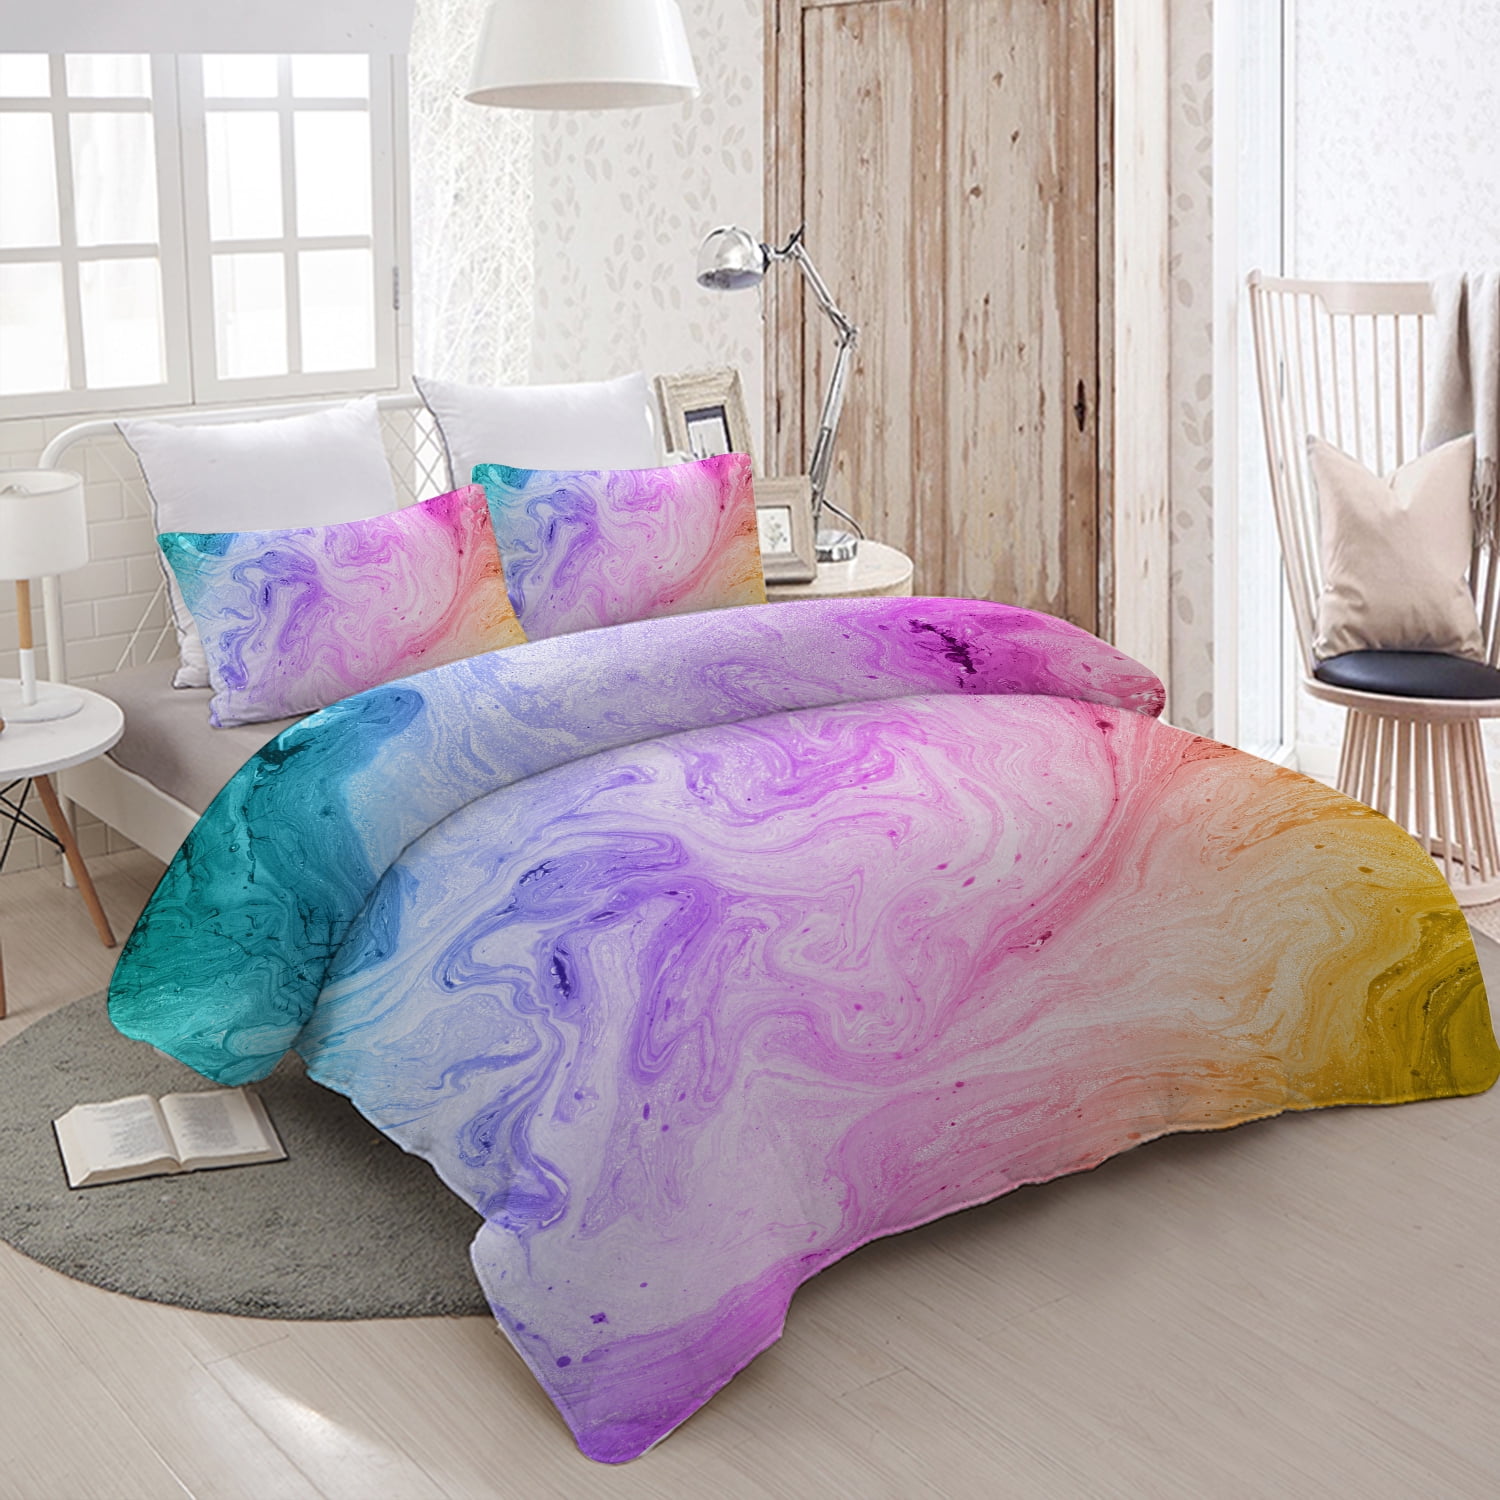 Bedding Full Twin Quilt Cover Unicorn Flower Dovet Cover Sets California King Personalized FC Comforter Cover Queen Pillowcases